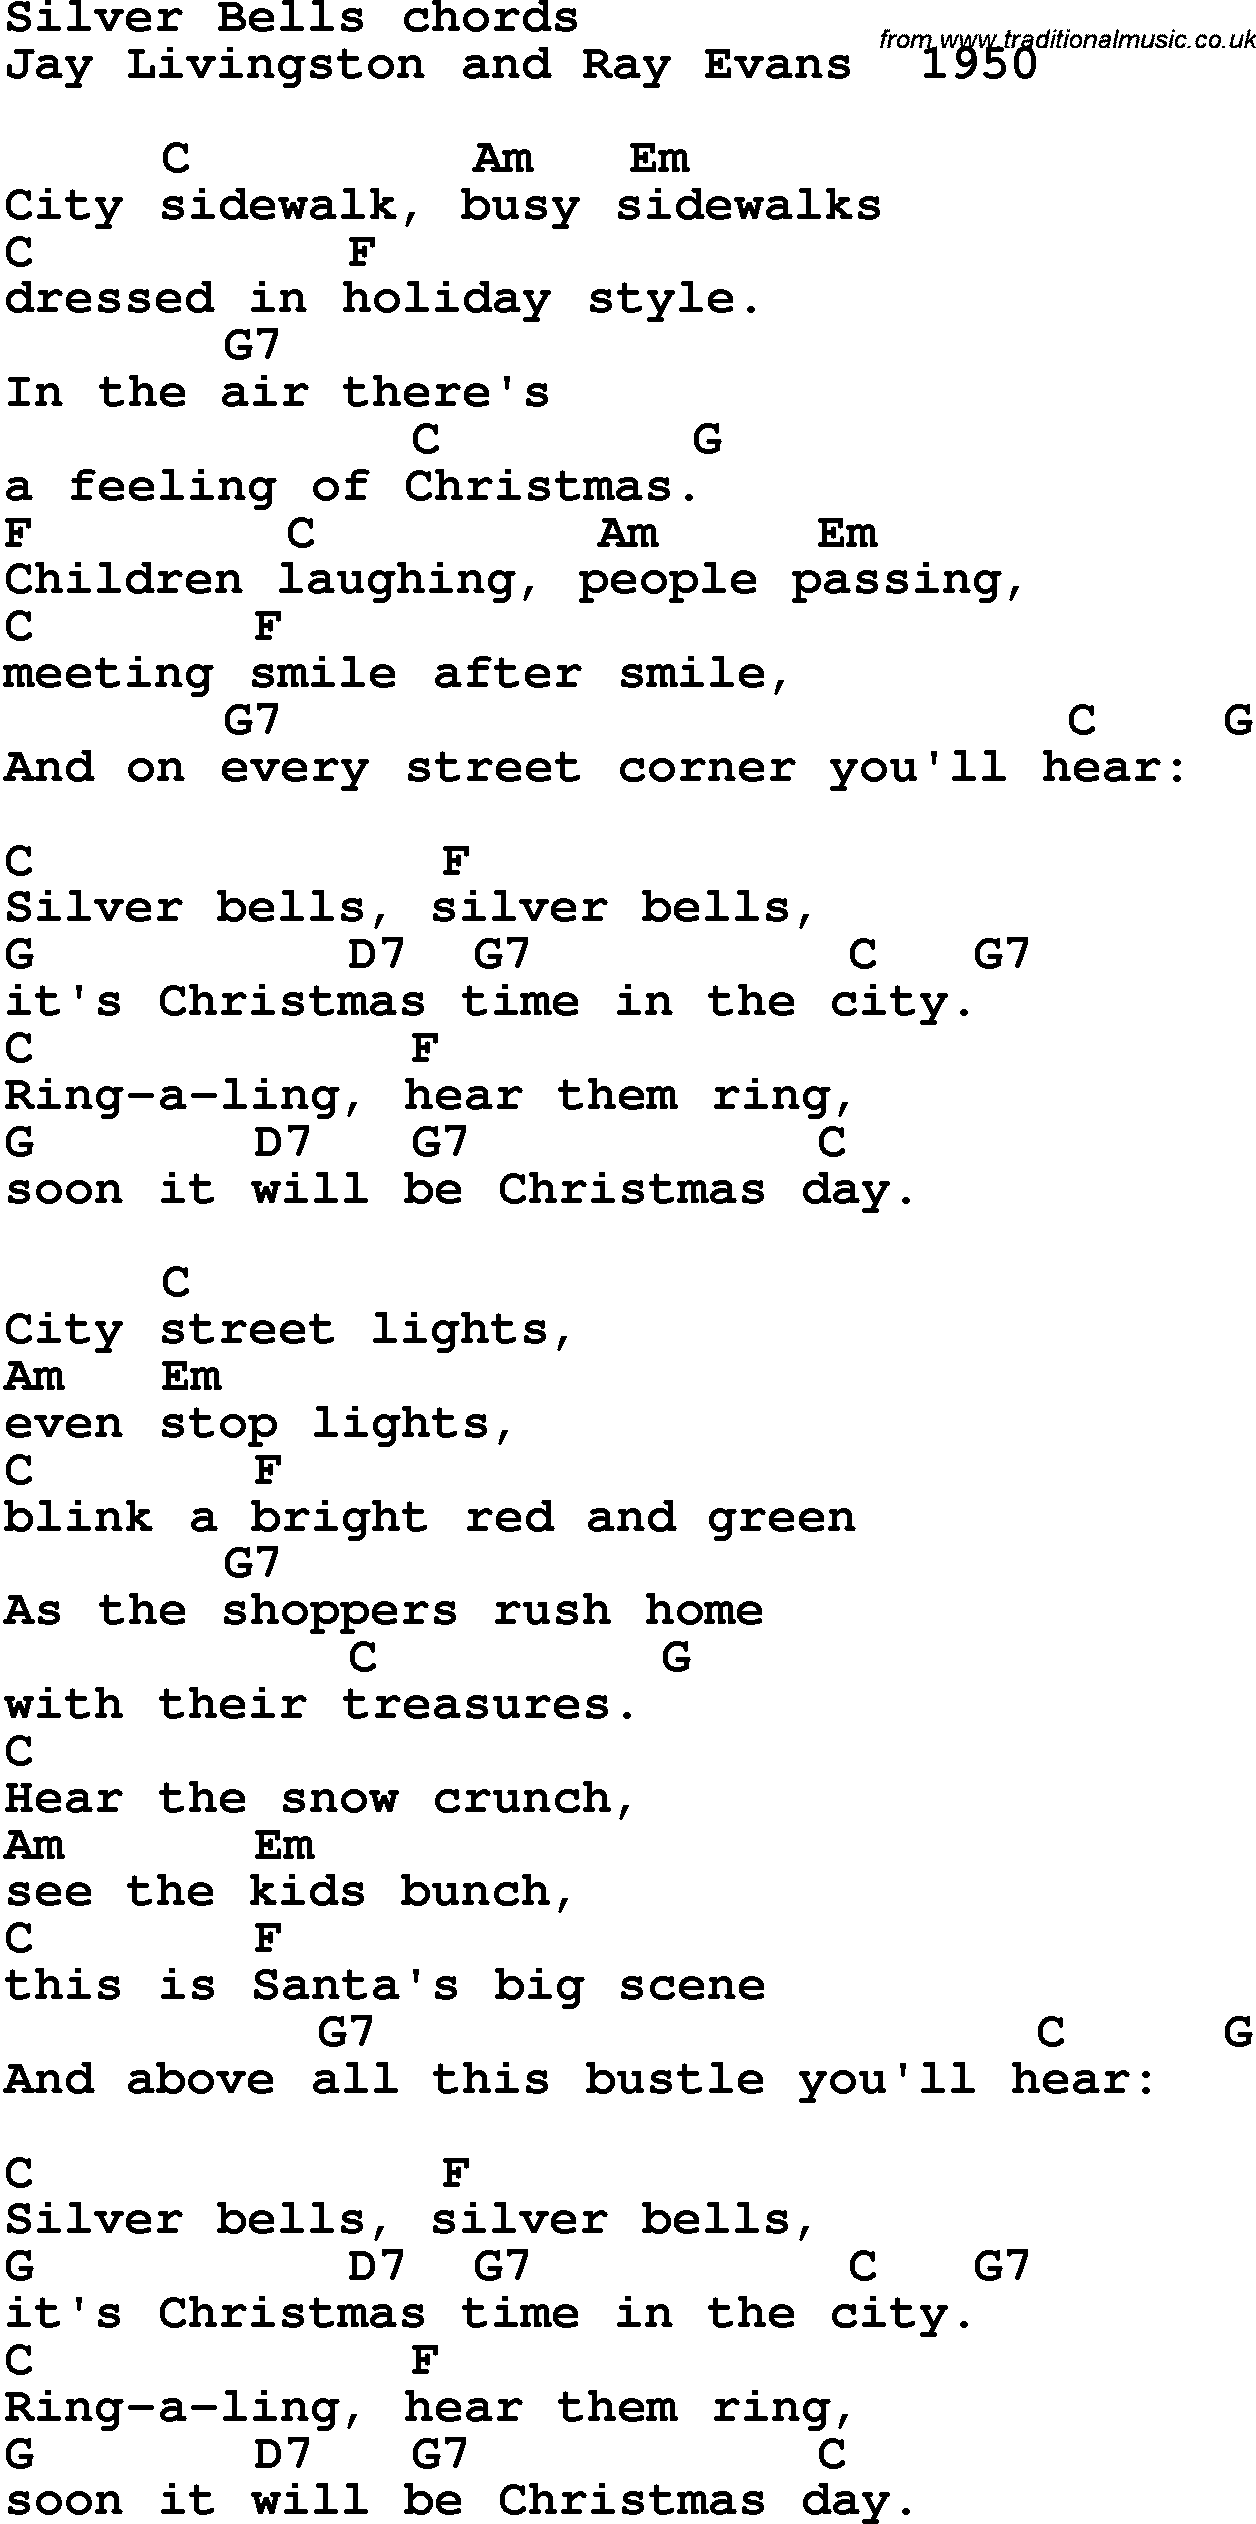 Song Lyrics with guitar chords for Silver Bells - Jay Livingston and Ray Evans  1950